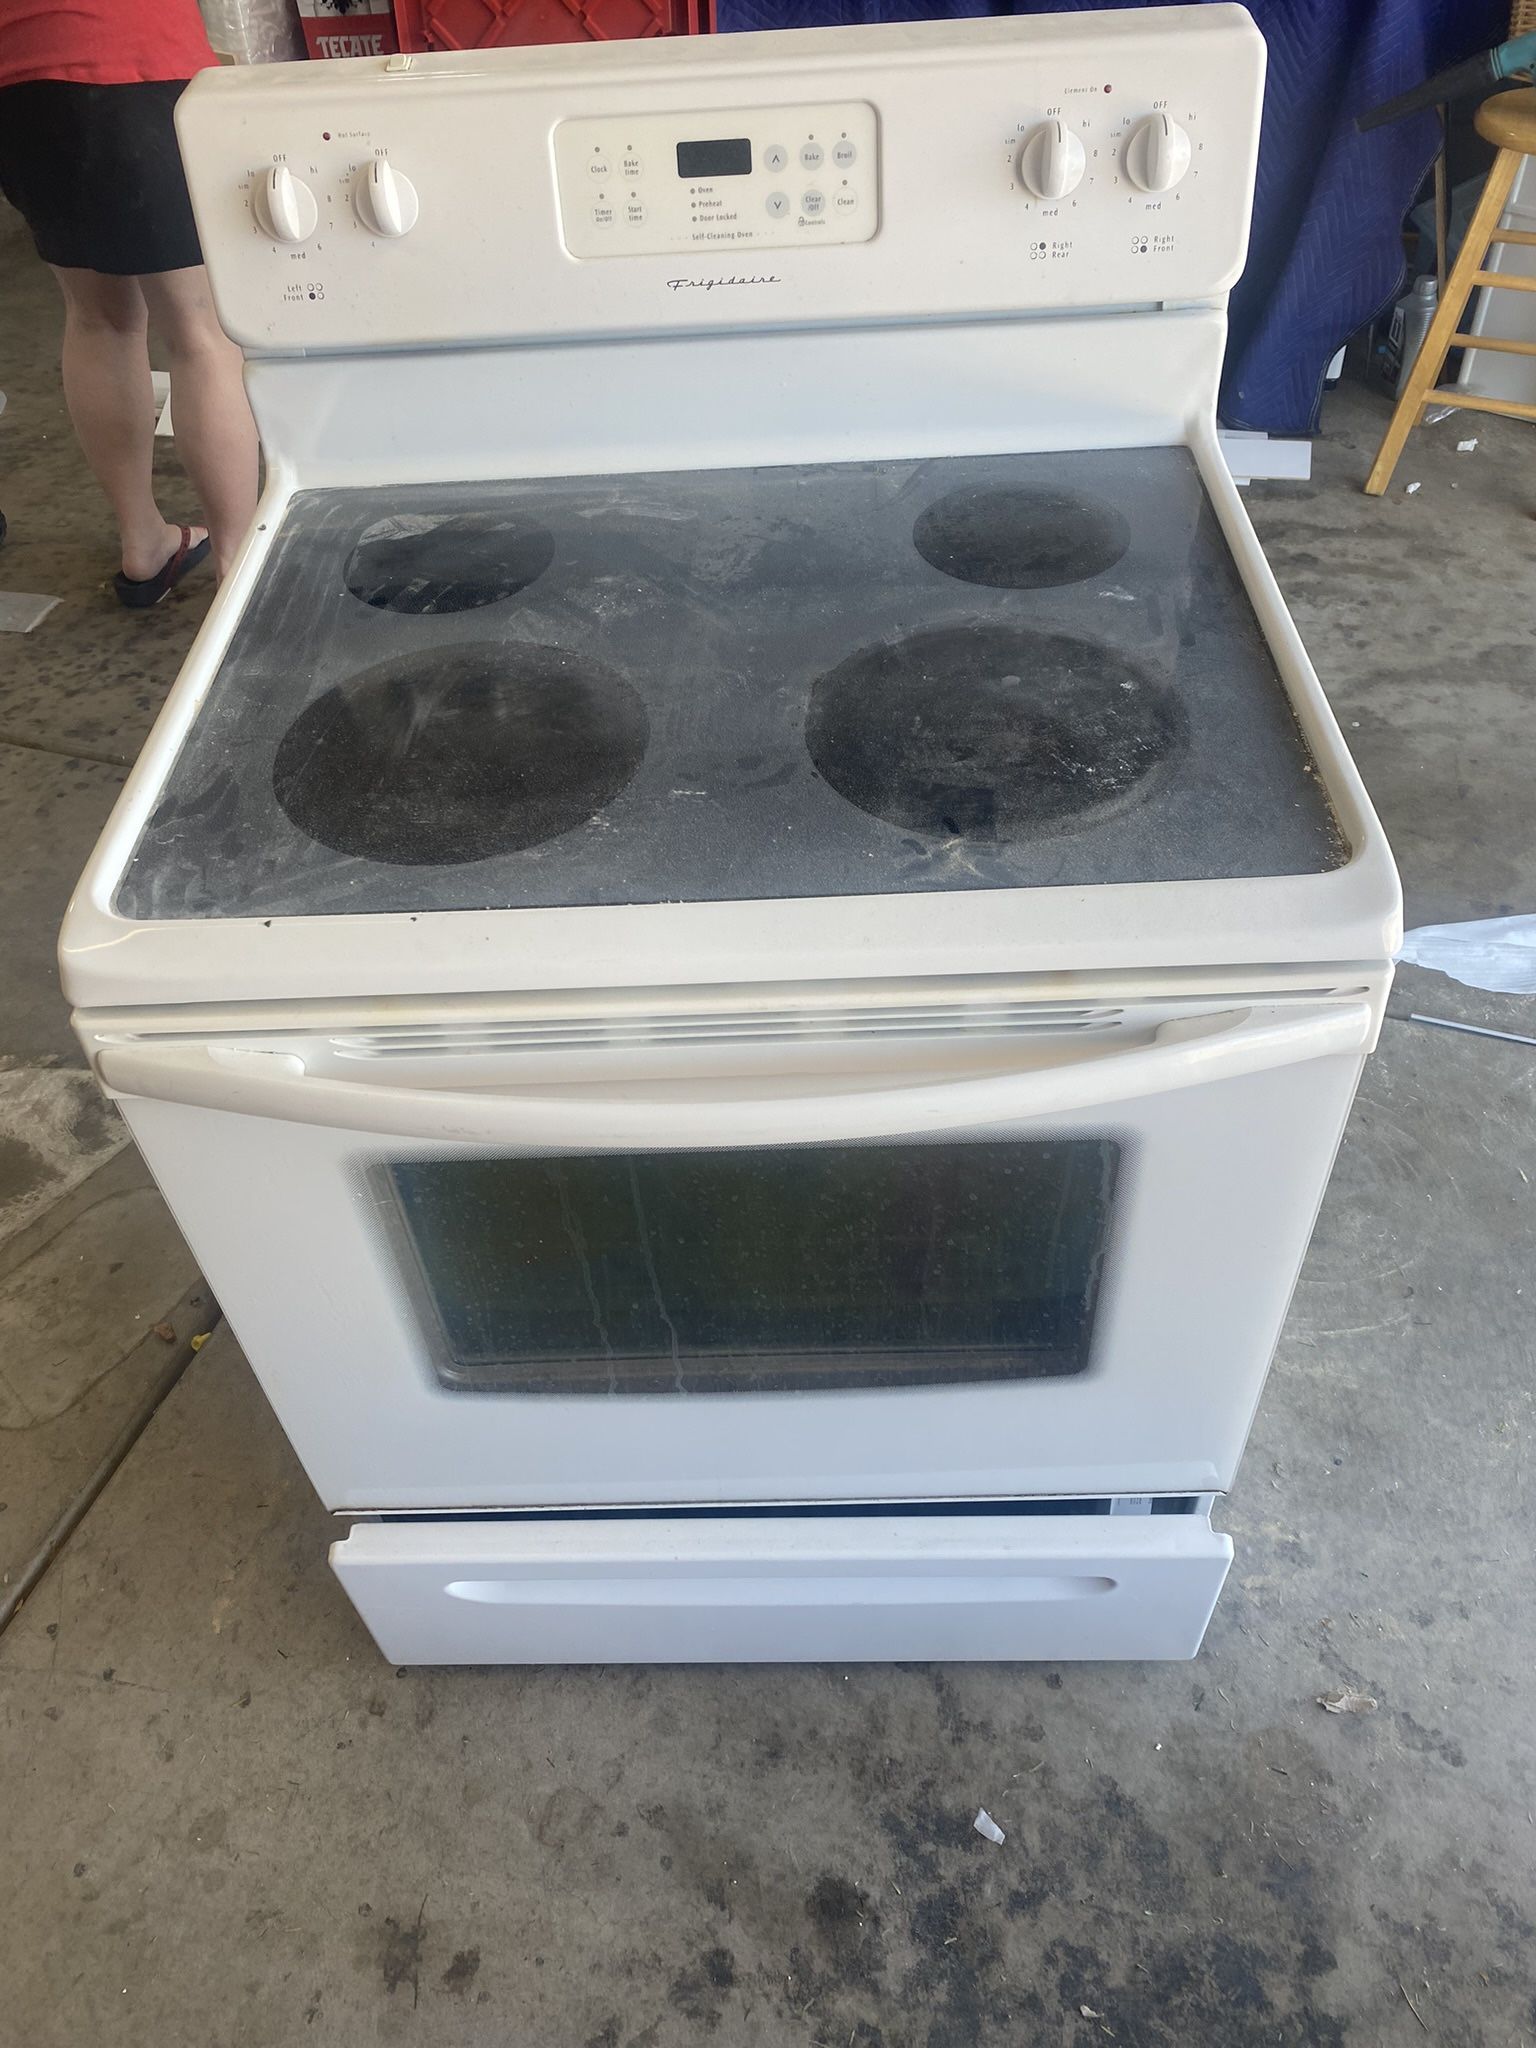 White Frigidaire Glass Top Stove Works Great